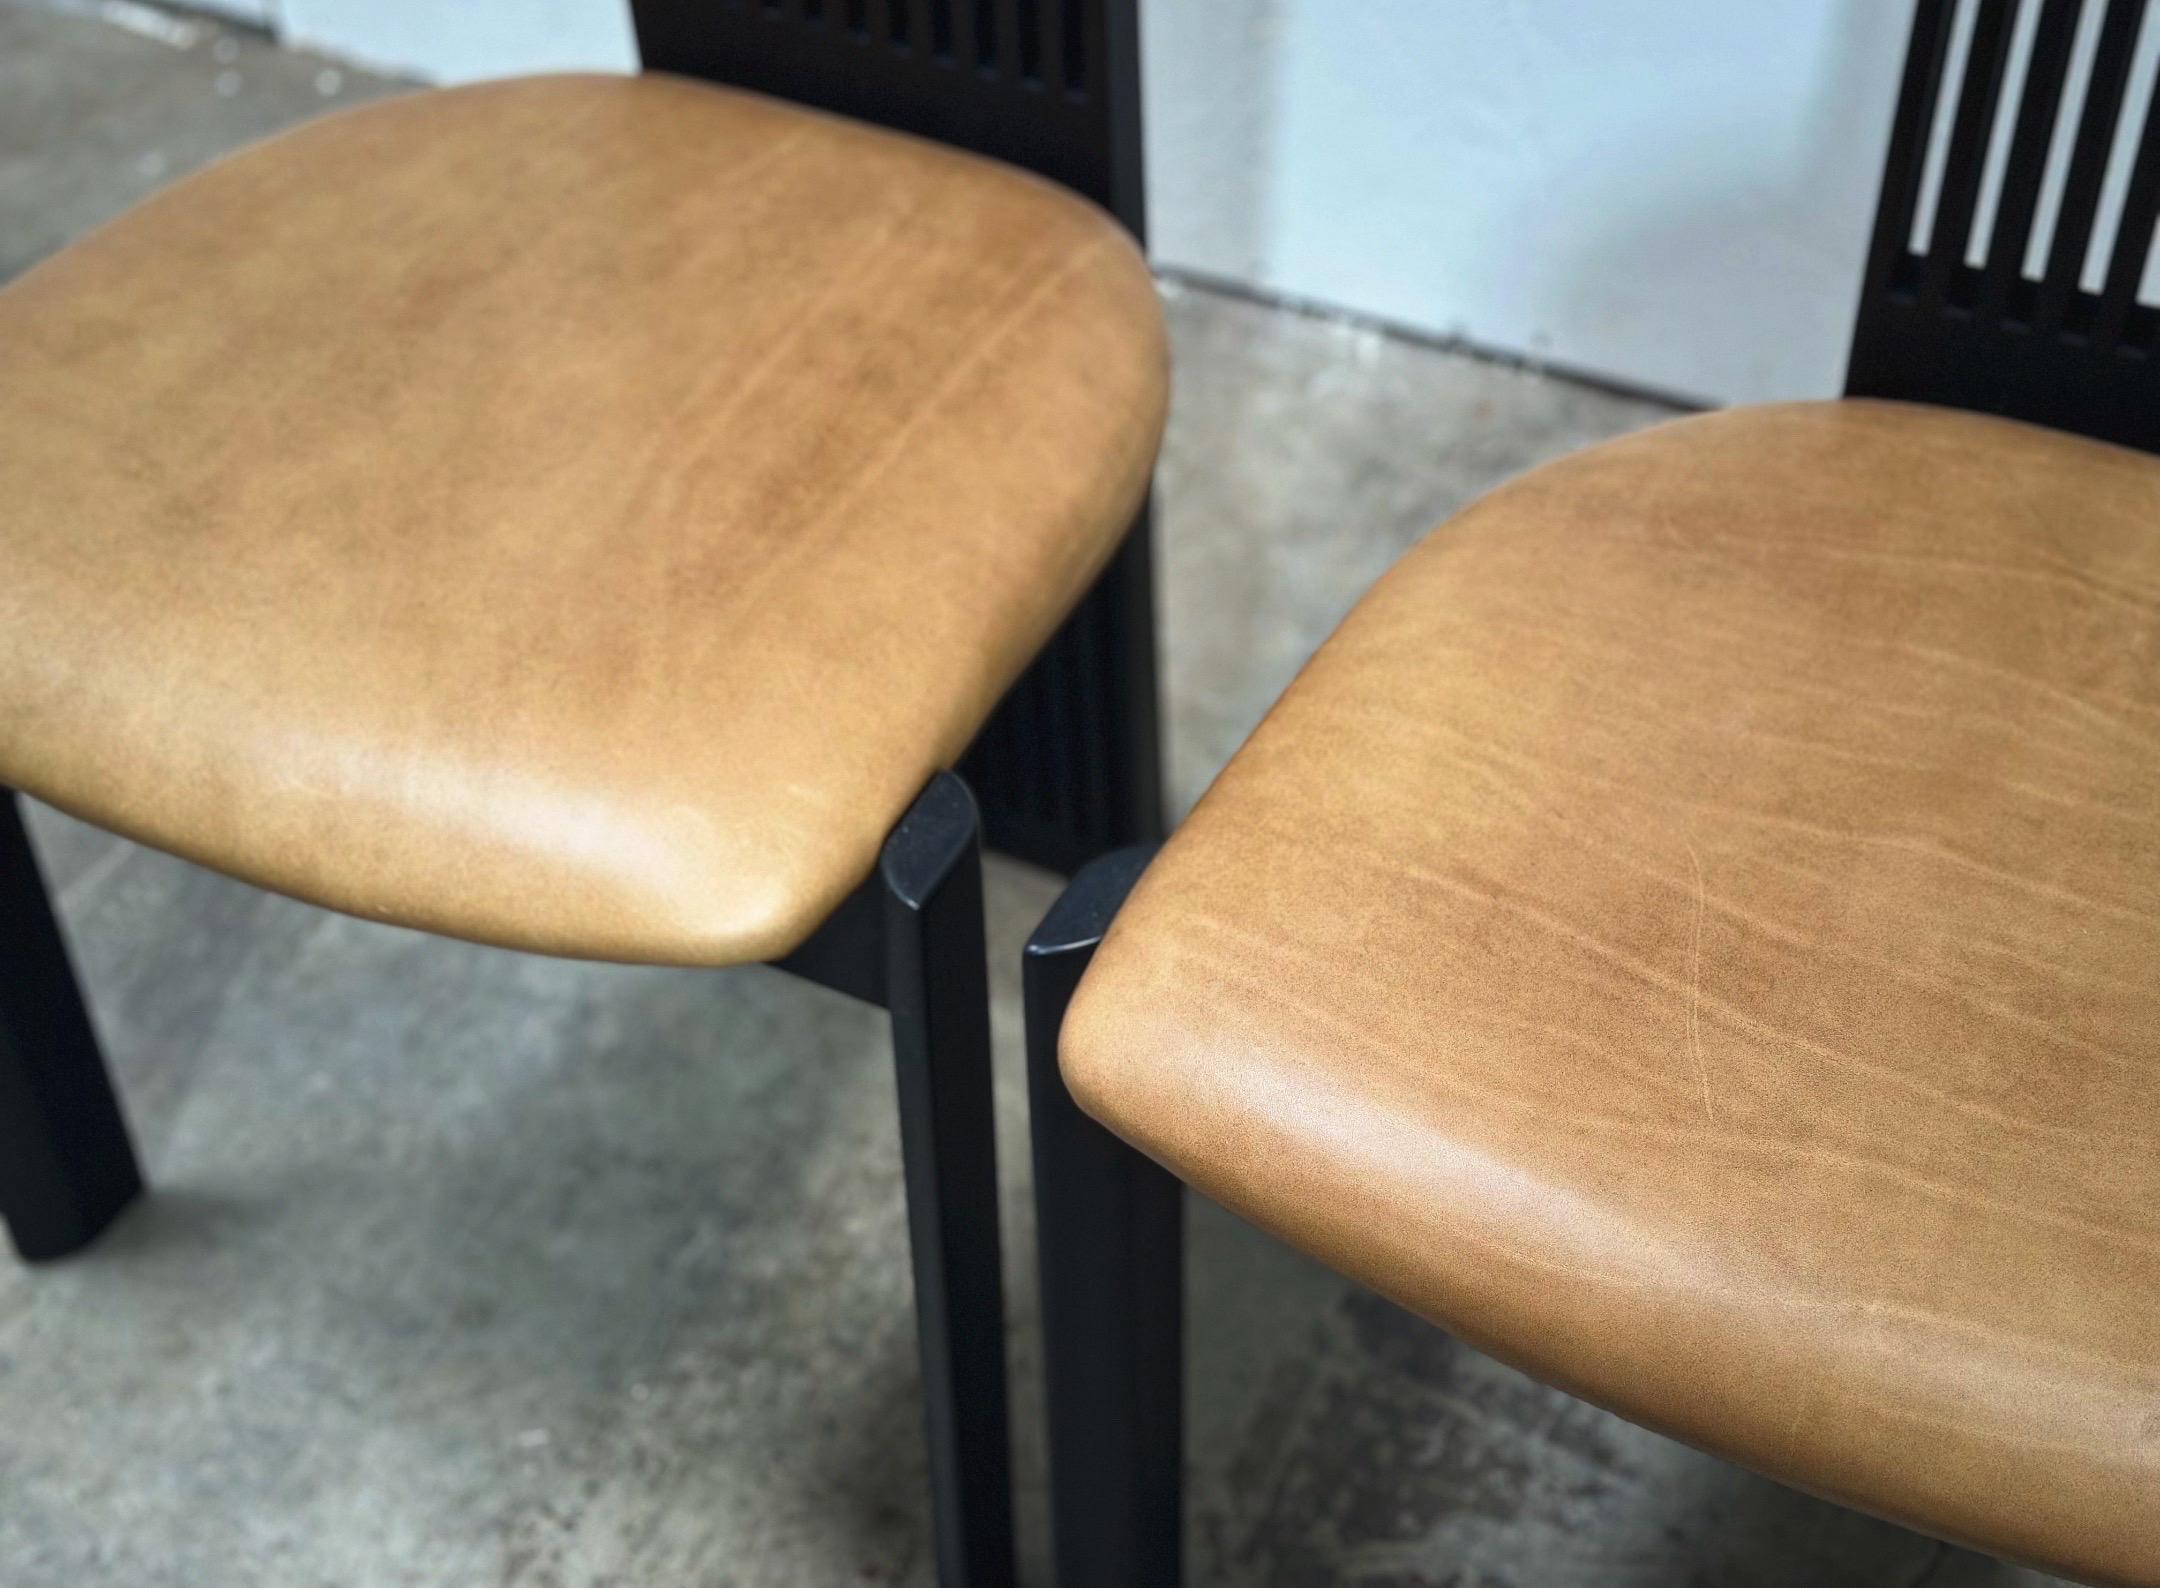 Post Modern High Back Leather Dining Chairs - Pietro Consantini - One Pair (2) In Good Condition For Sale In Decatur, GA